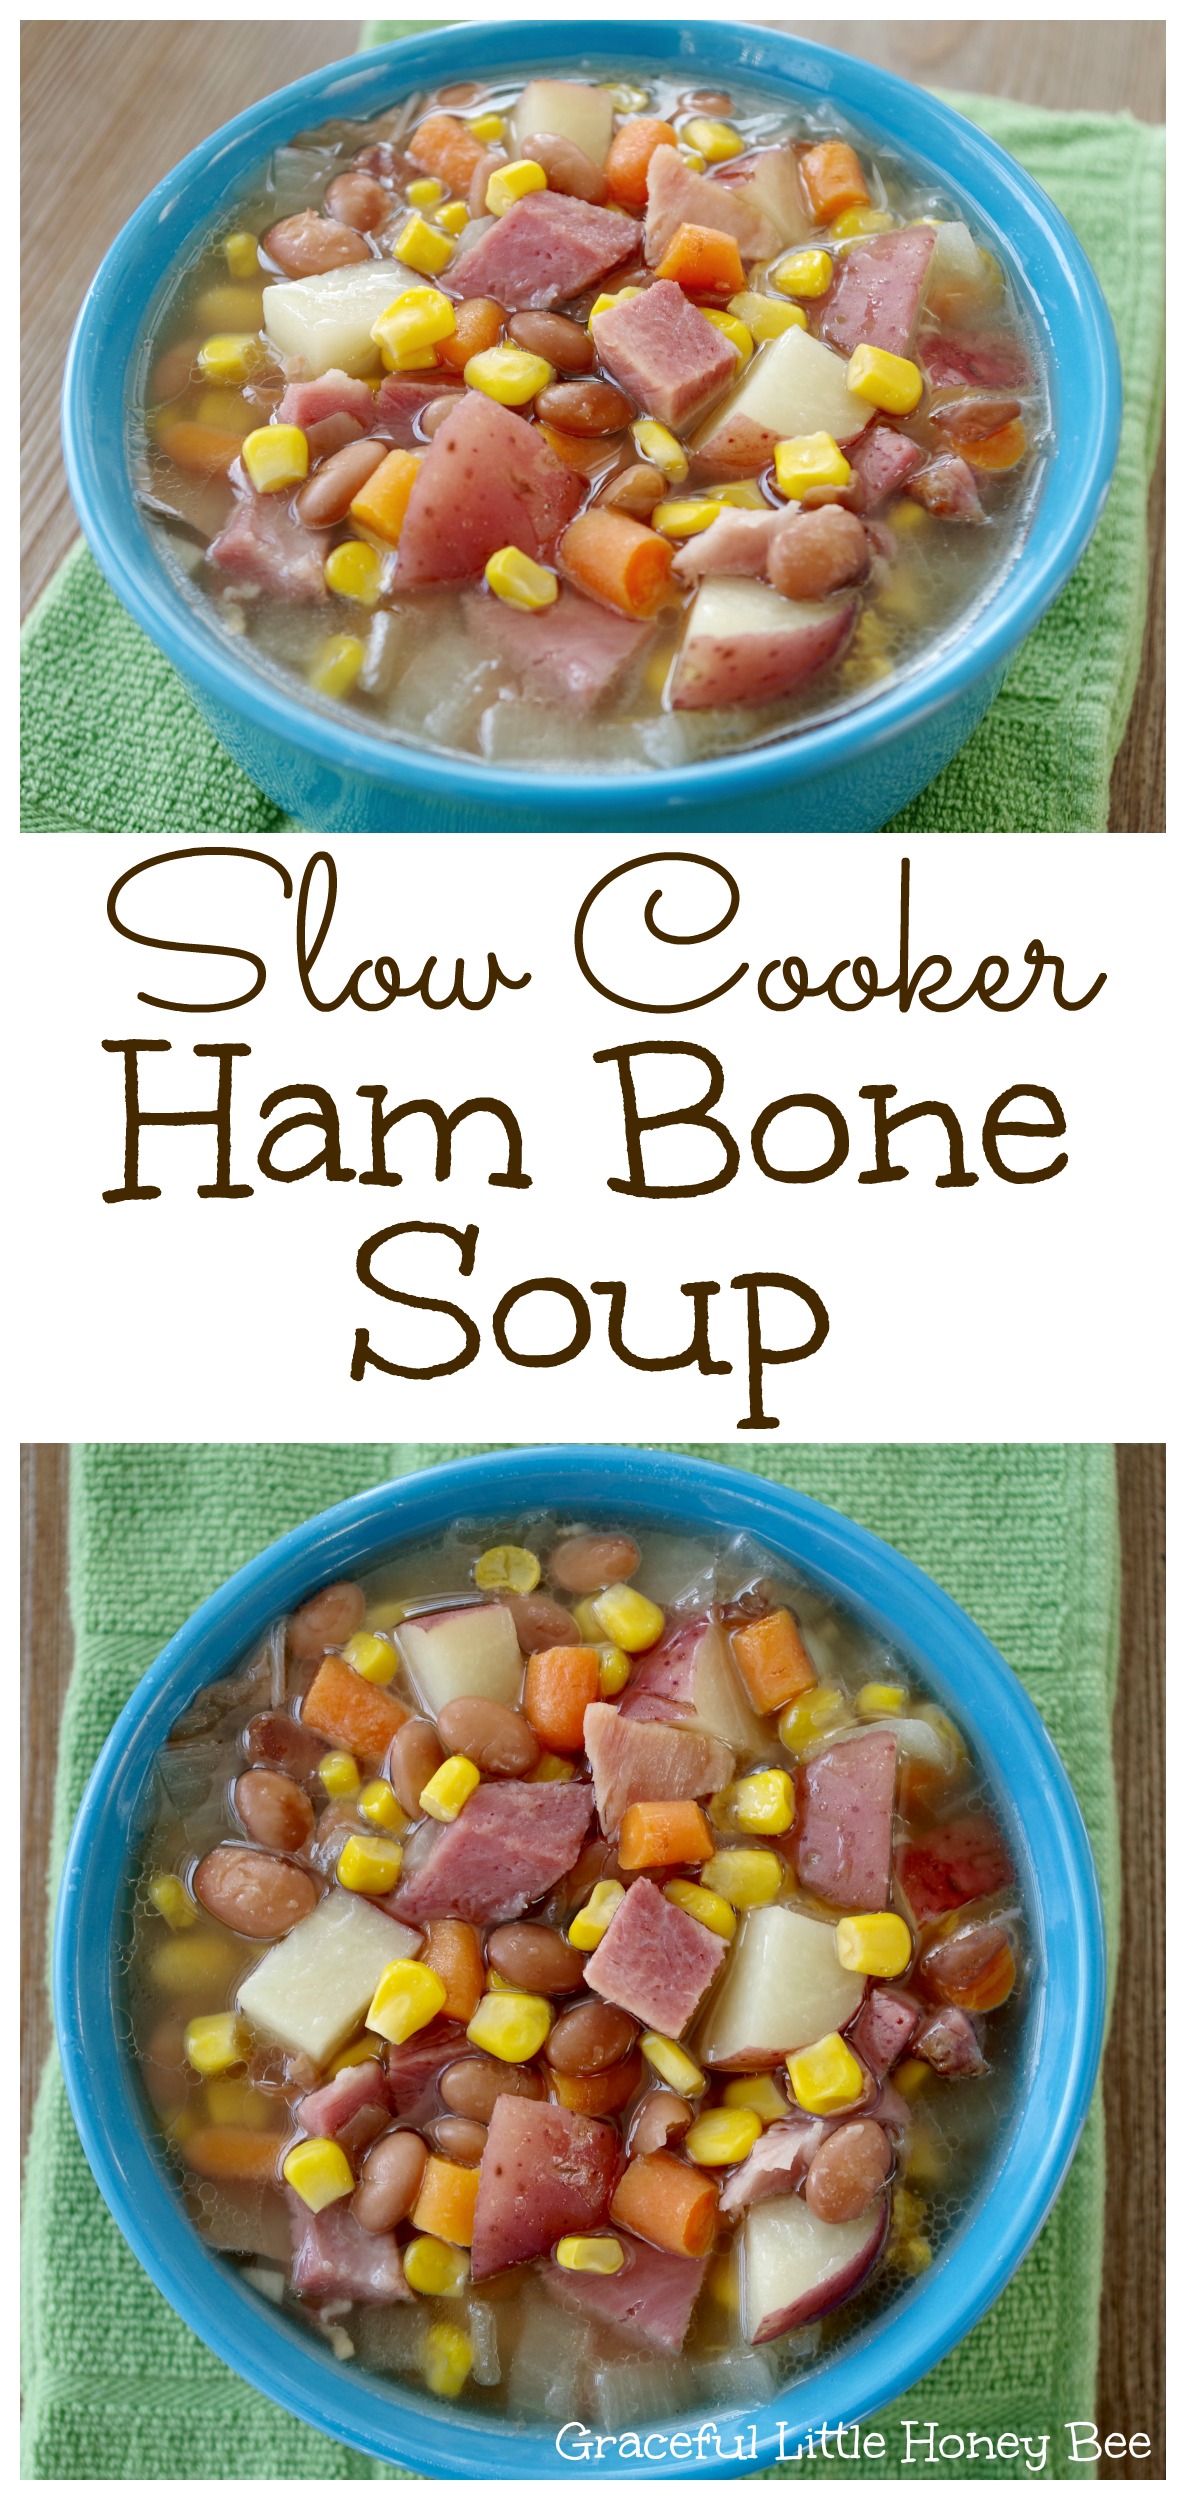 Make a rich and satisfying soup using your leftover ham bone as the base in your slow cooker.